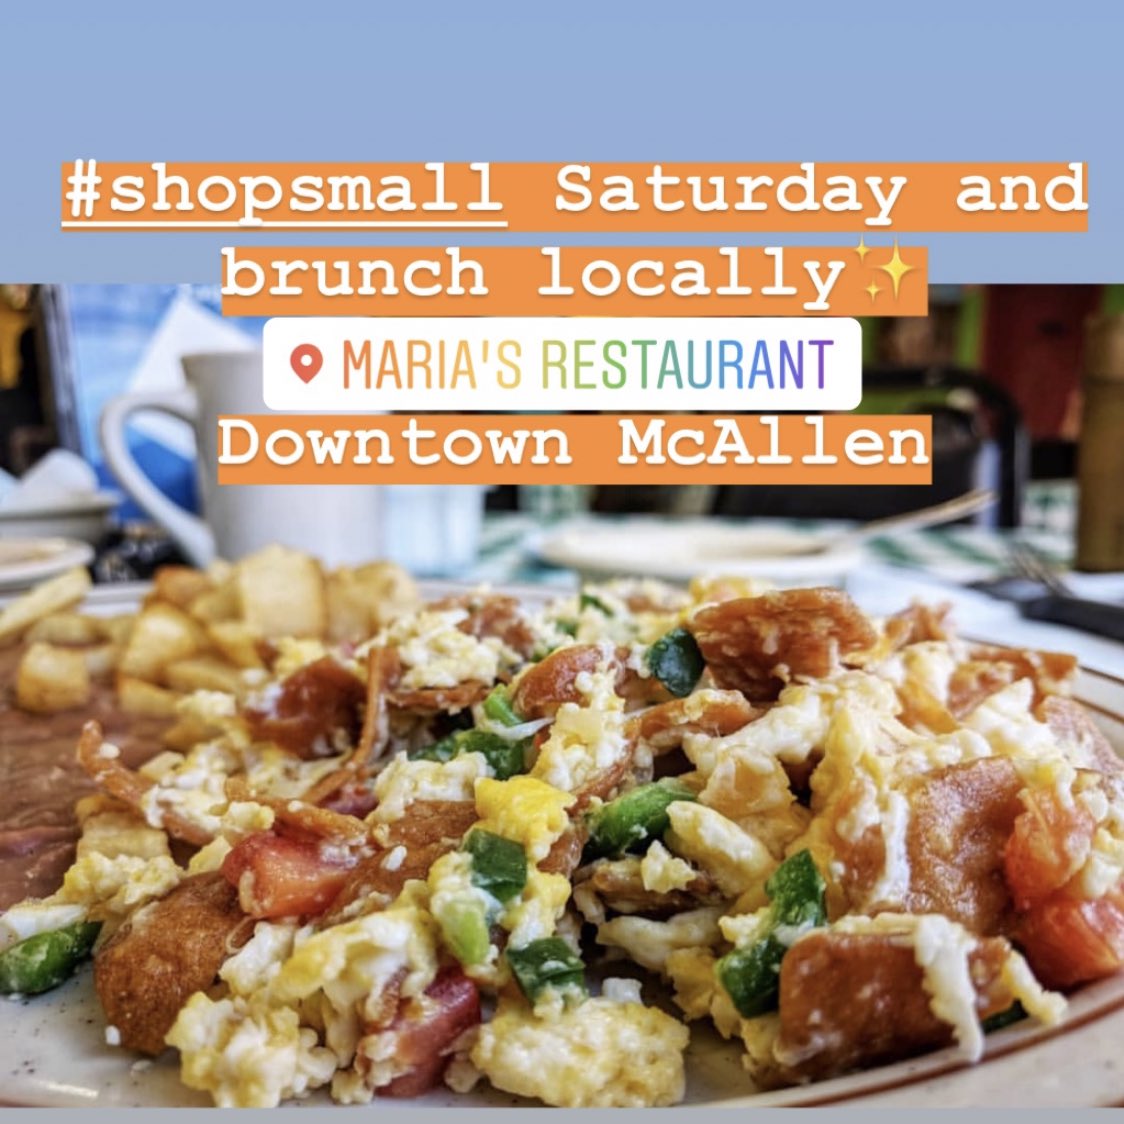 #ShopSmall and #DineSmall this weekend to support local independent retailers and restaurants near you✨